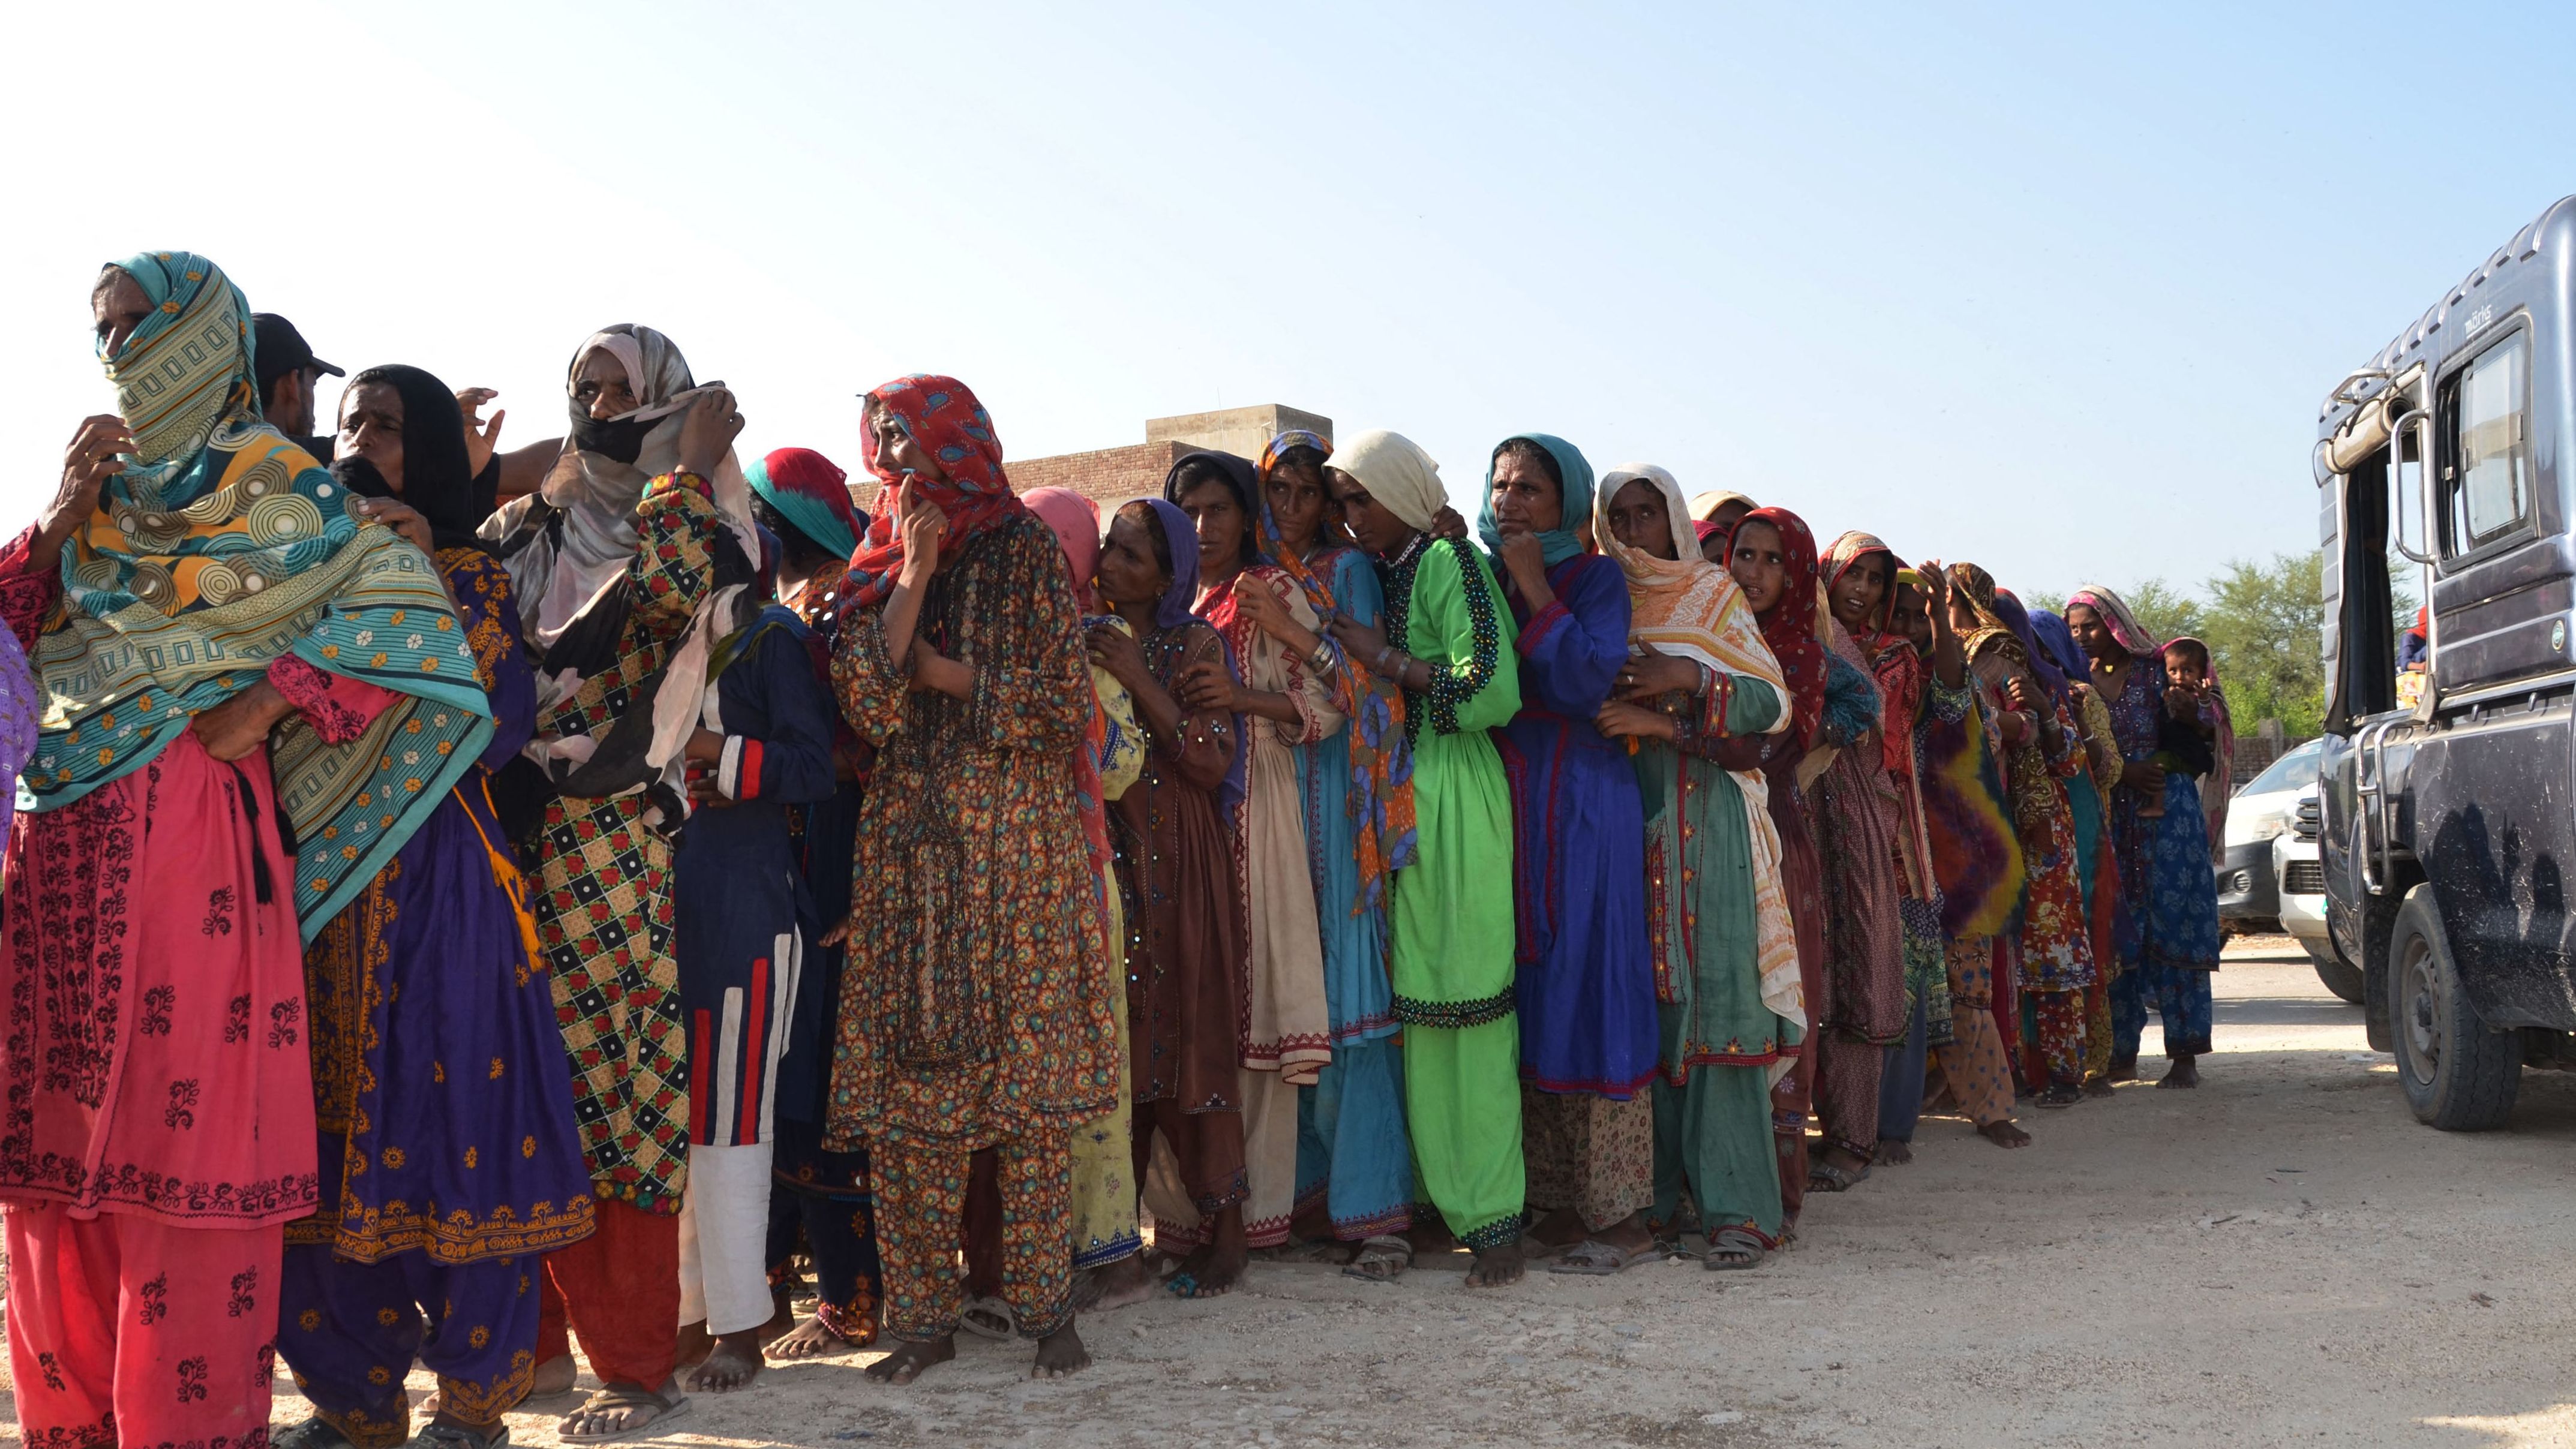 Flood victims line up up to receive food aid at Dera Allah Yar town of Jaffarabad district in Balochistan province on September 17, 2022.